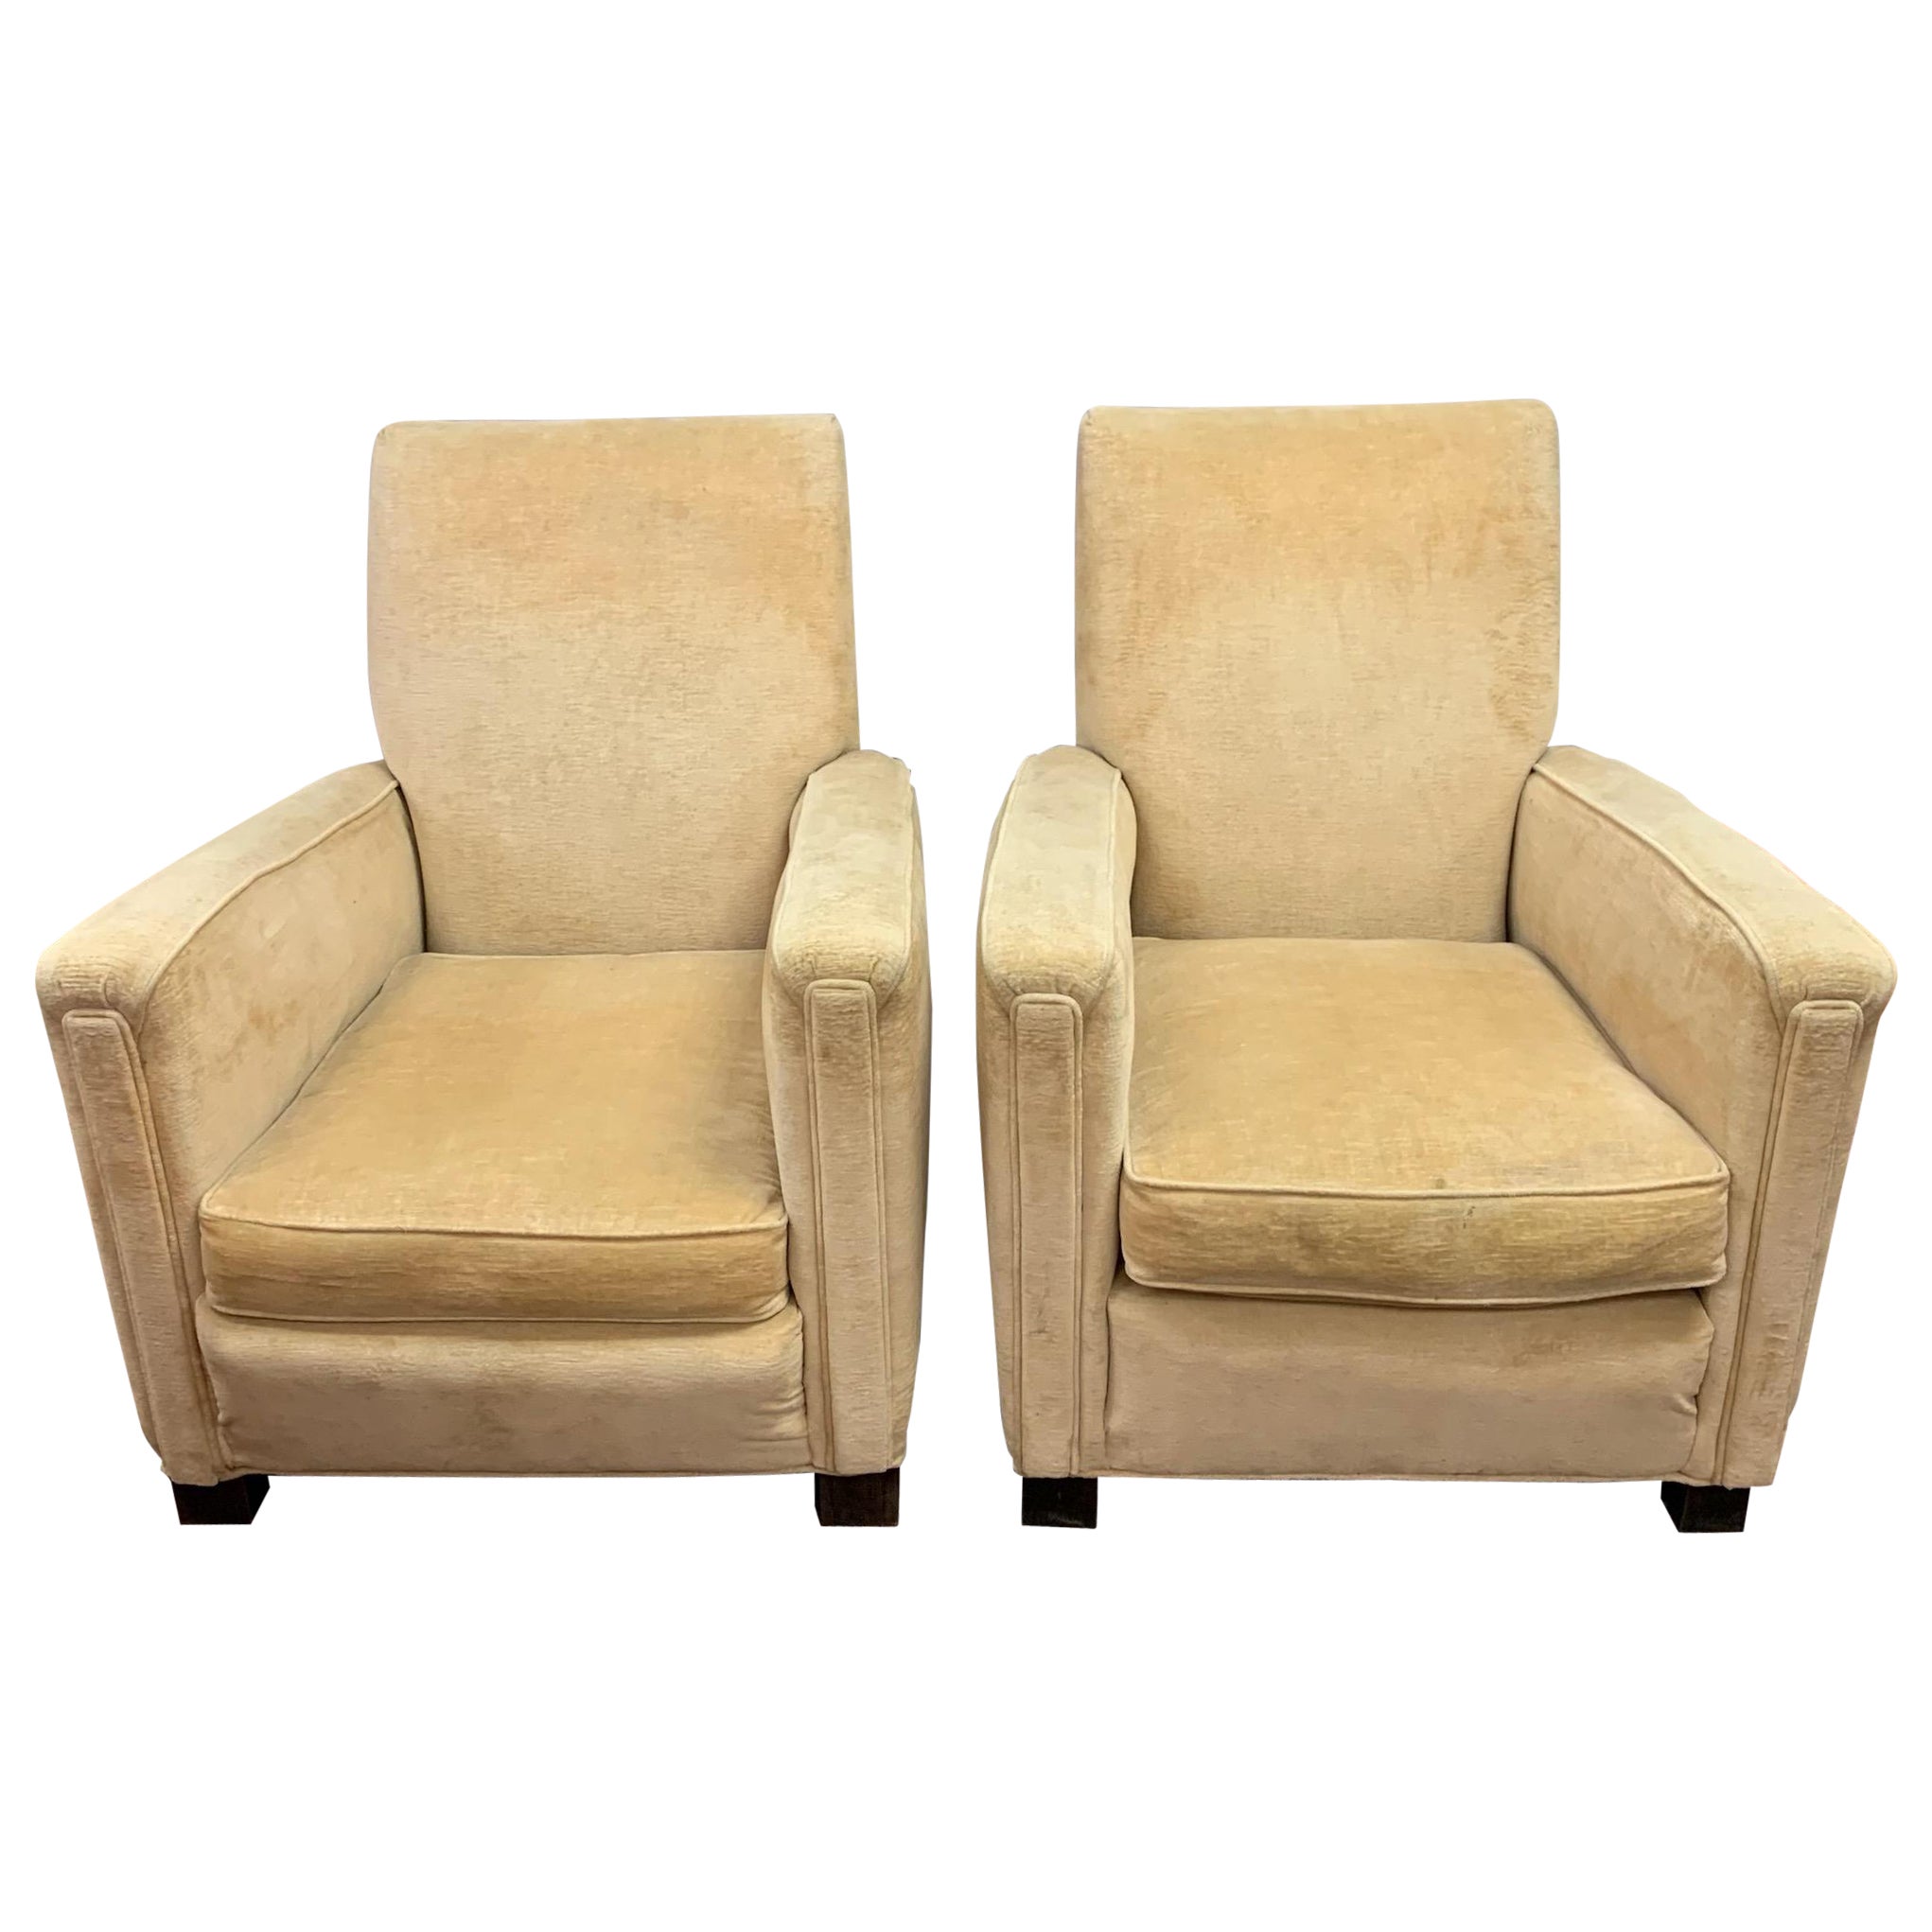 Pair of Matching Upholstered Art Deco Style Club Lounge Chairs